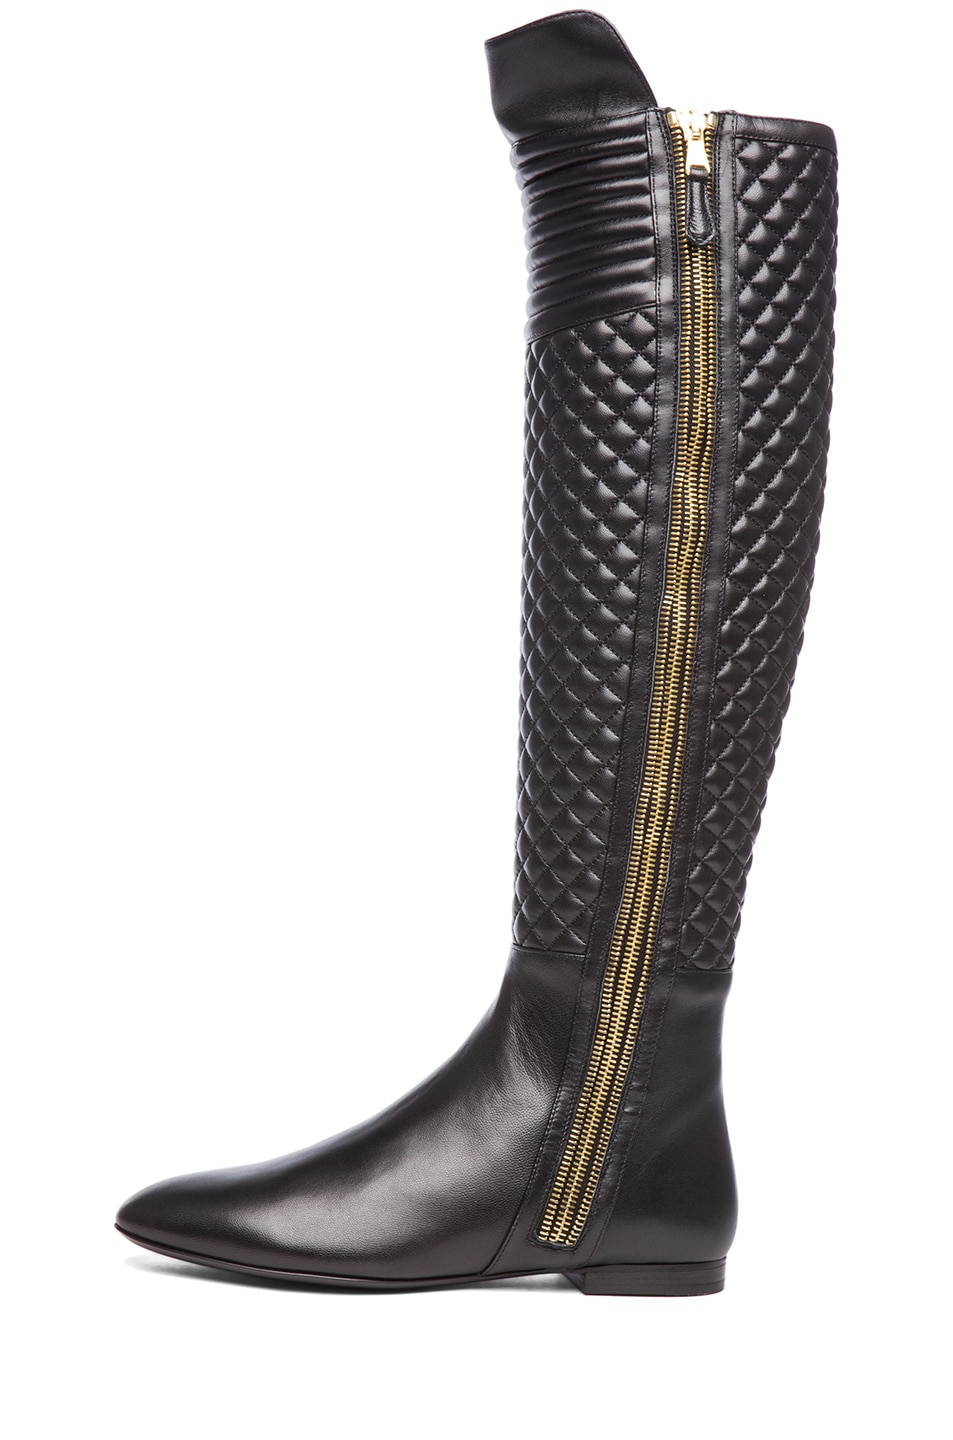 Brian Atwood Ares Nappa Leather Boot in Black Leather | FWRD